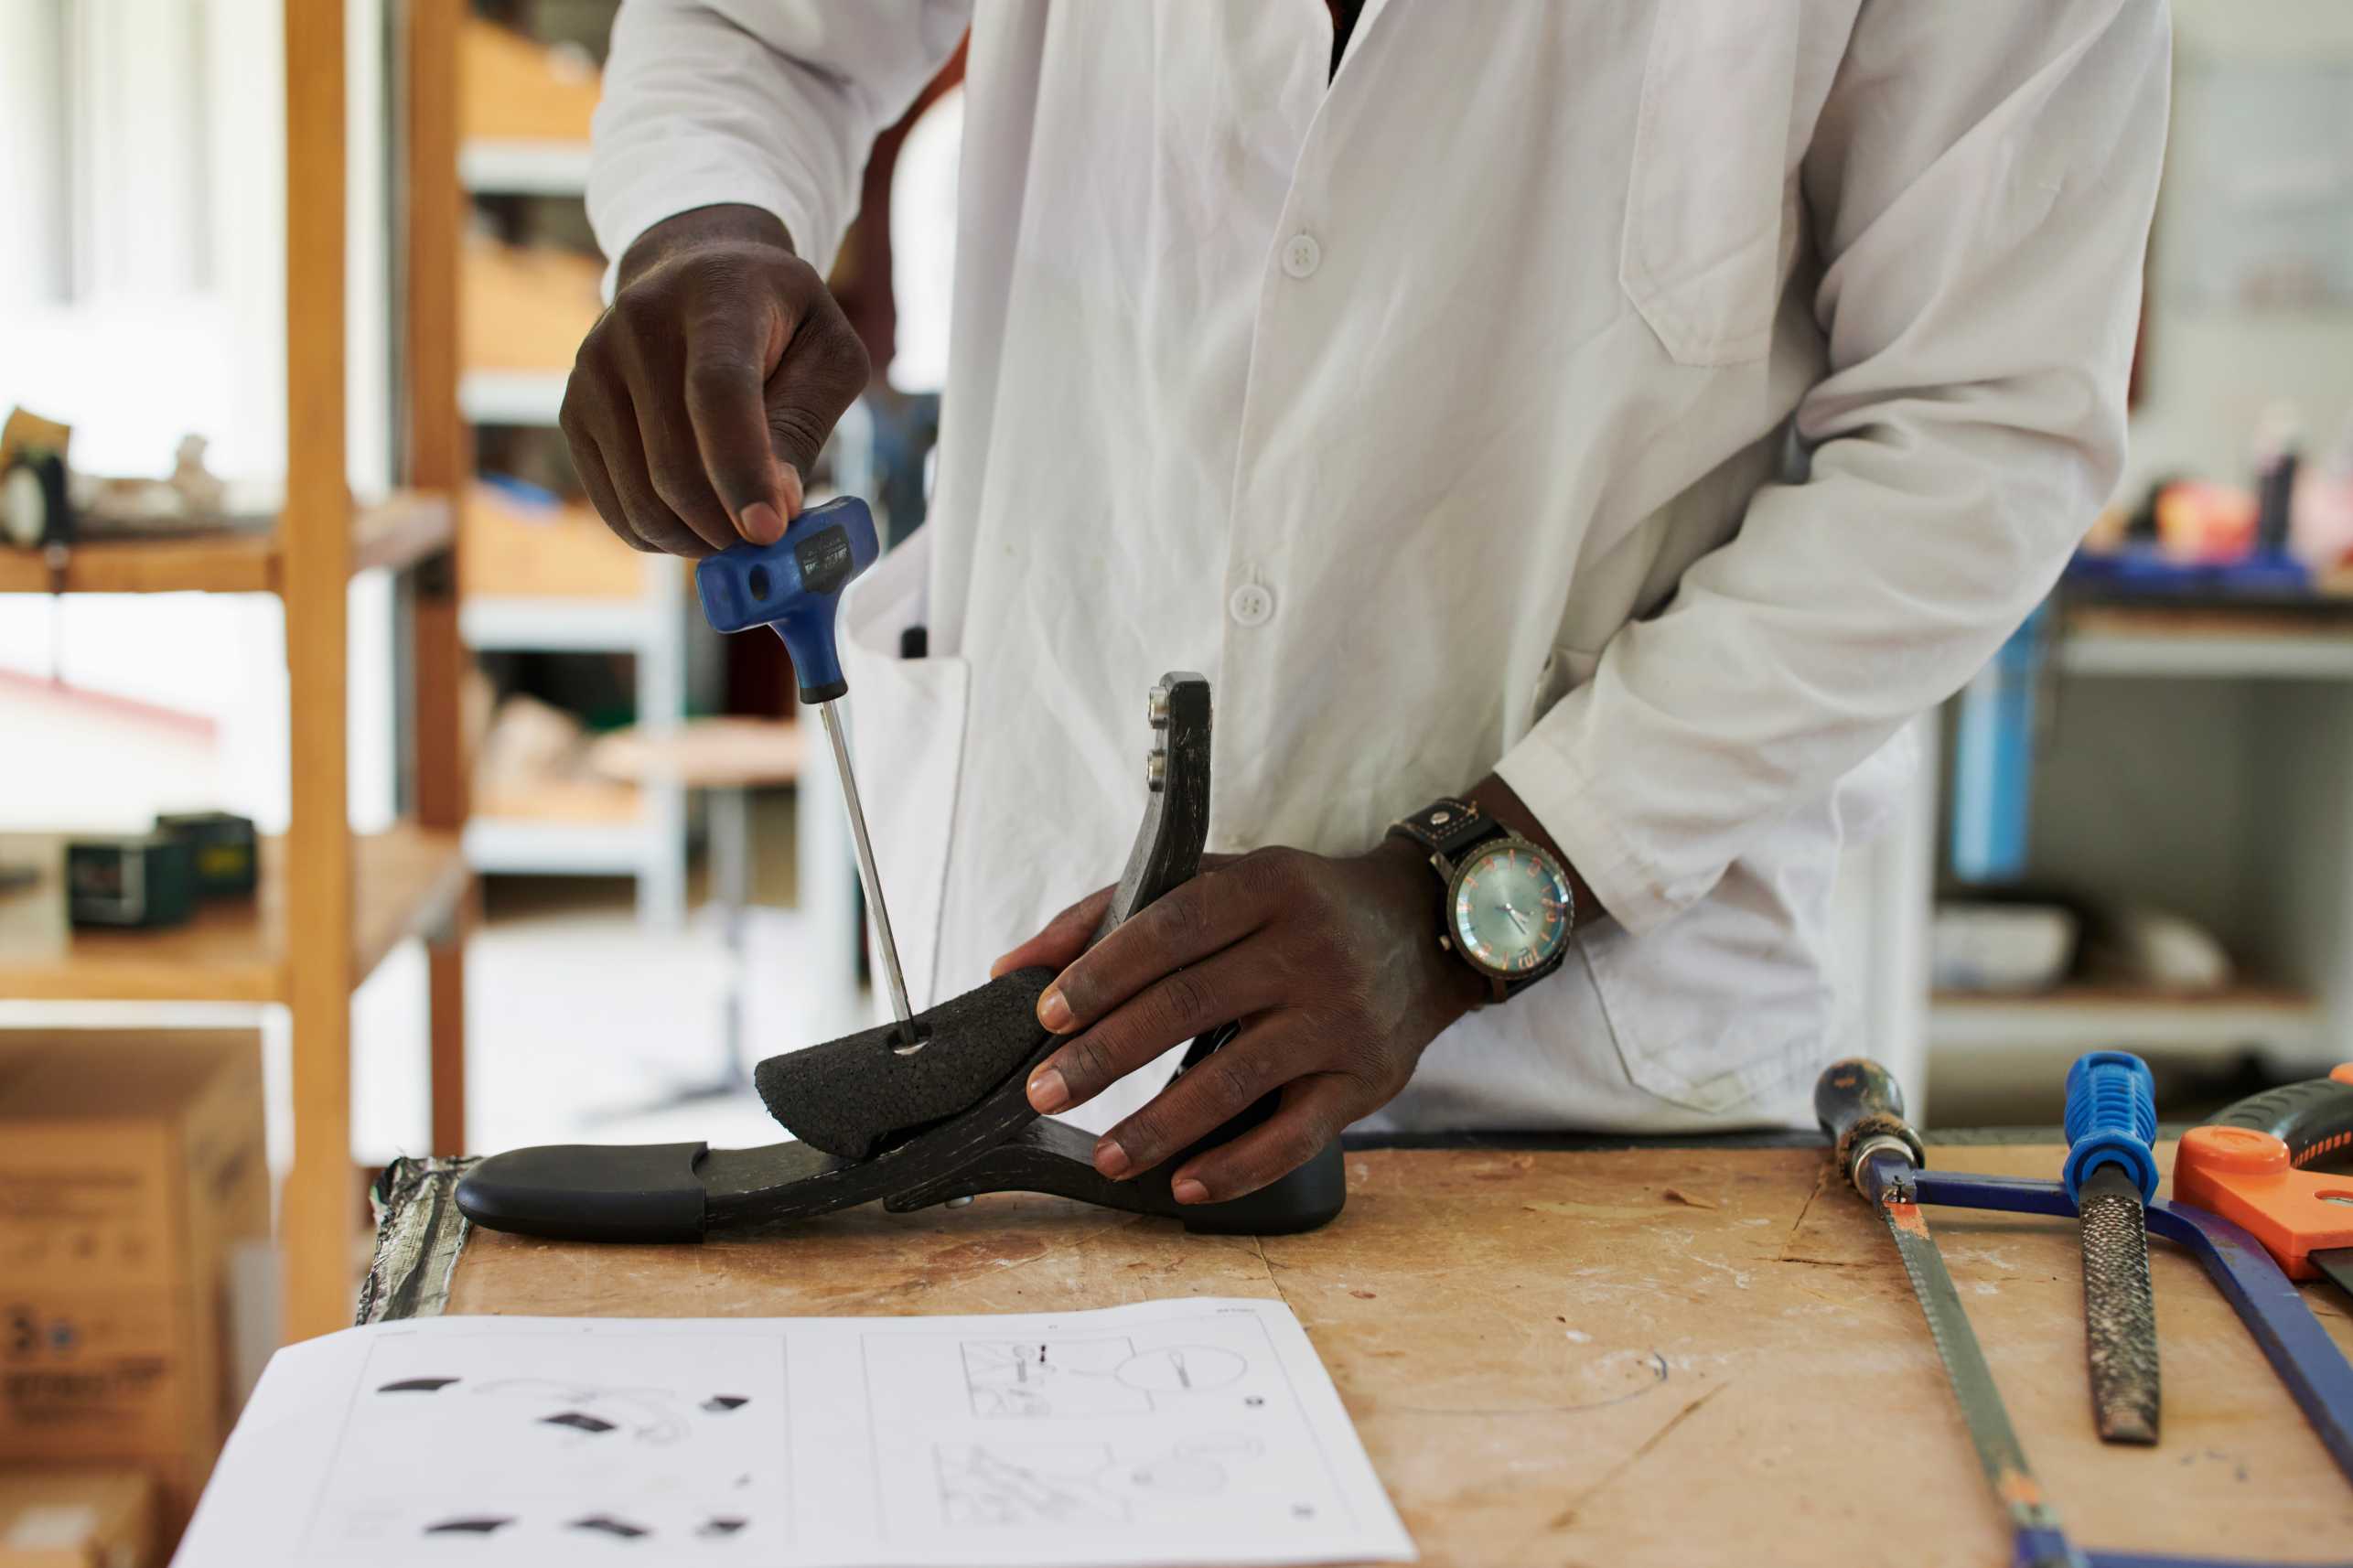 Hands of a man are seen working on the Circleg prosthetic legs in what appears to be a factory somewhere in Africa.